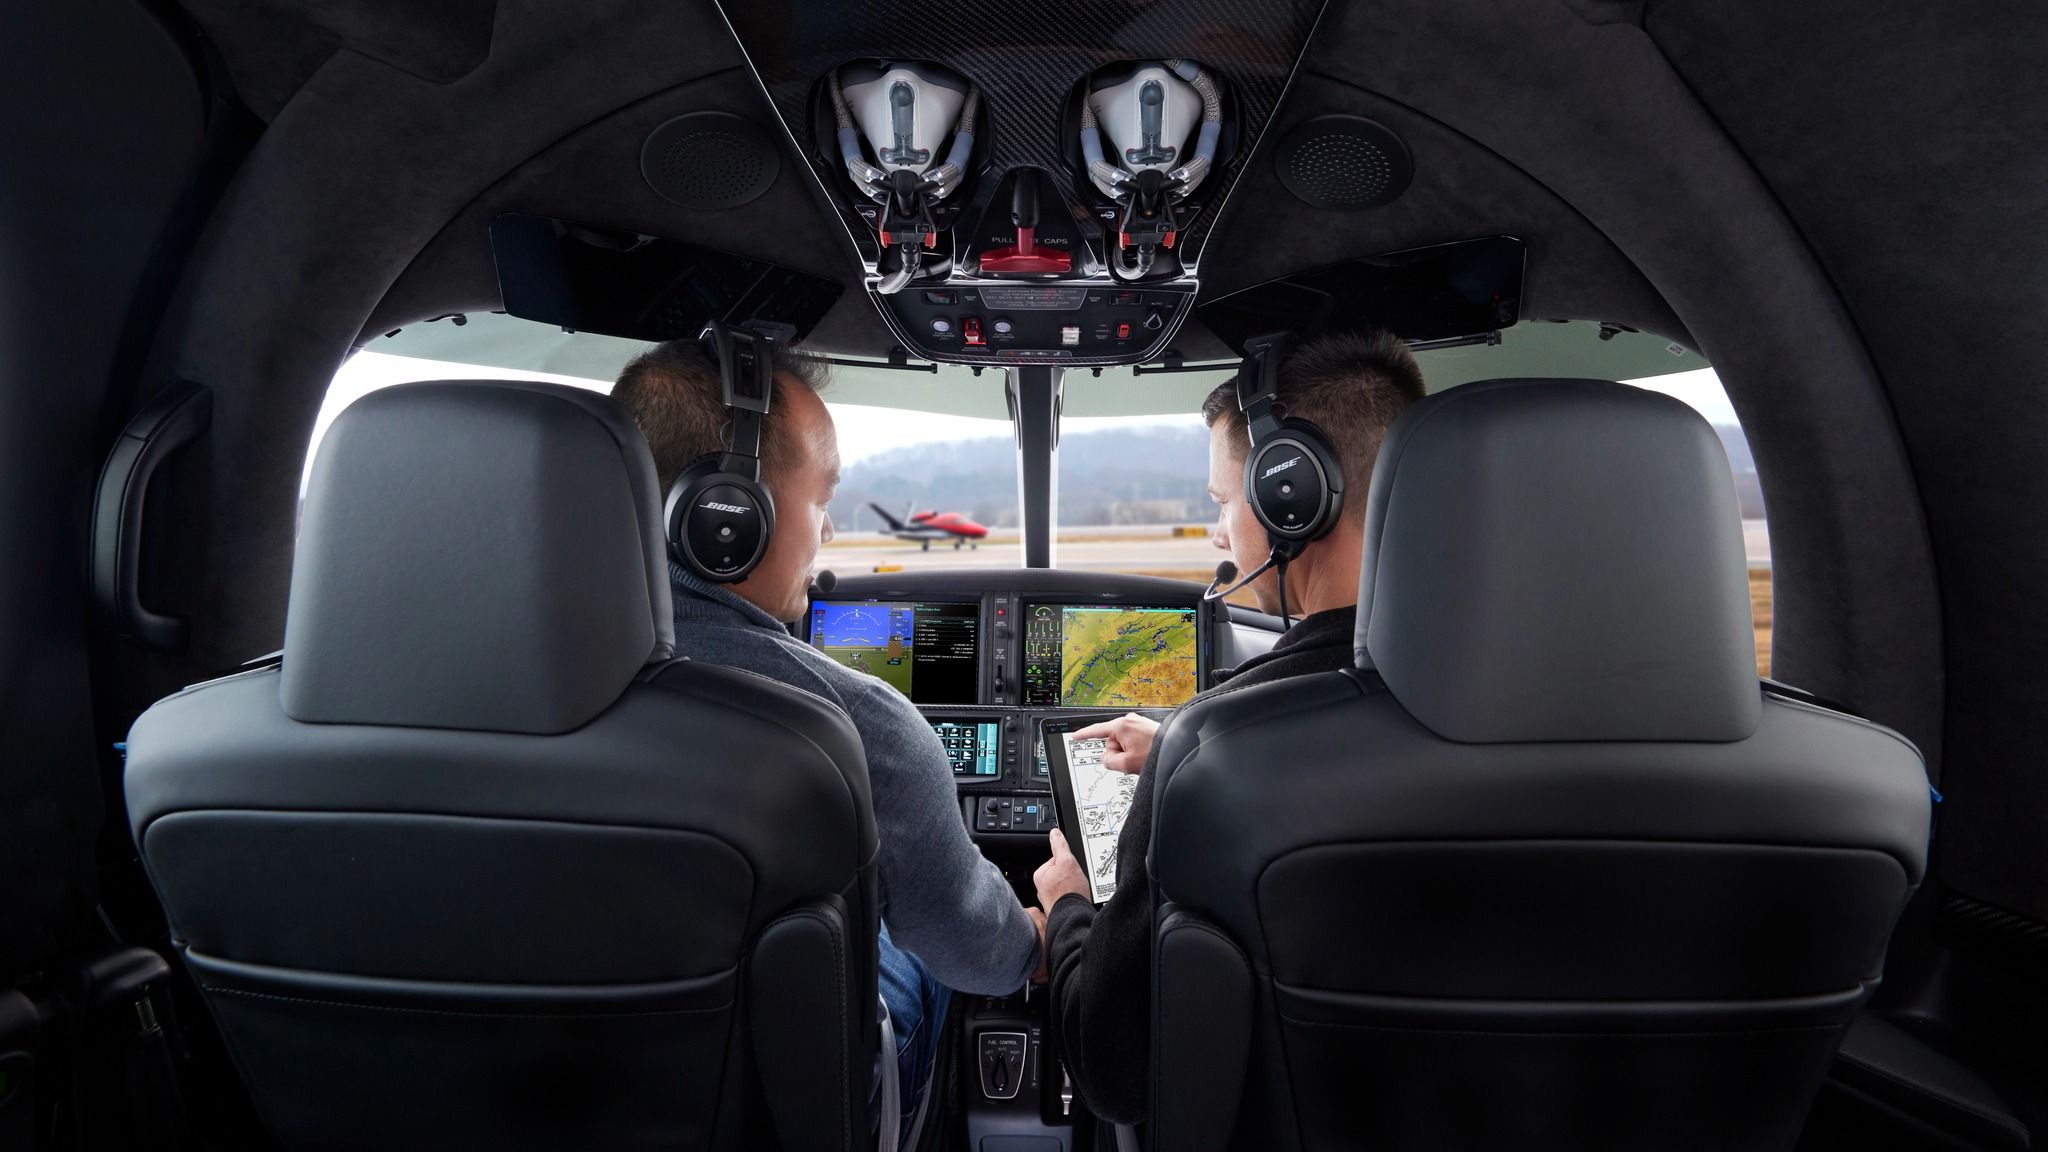 Two pilots sitting in the cockpit of a Cirrus Vision jet.